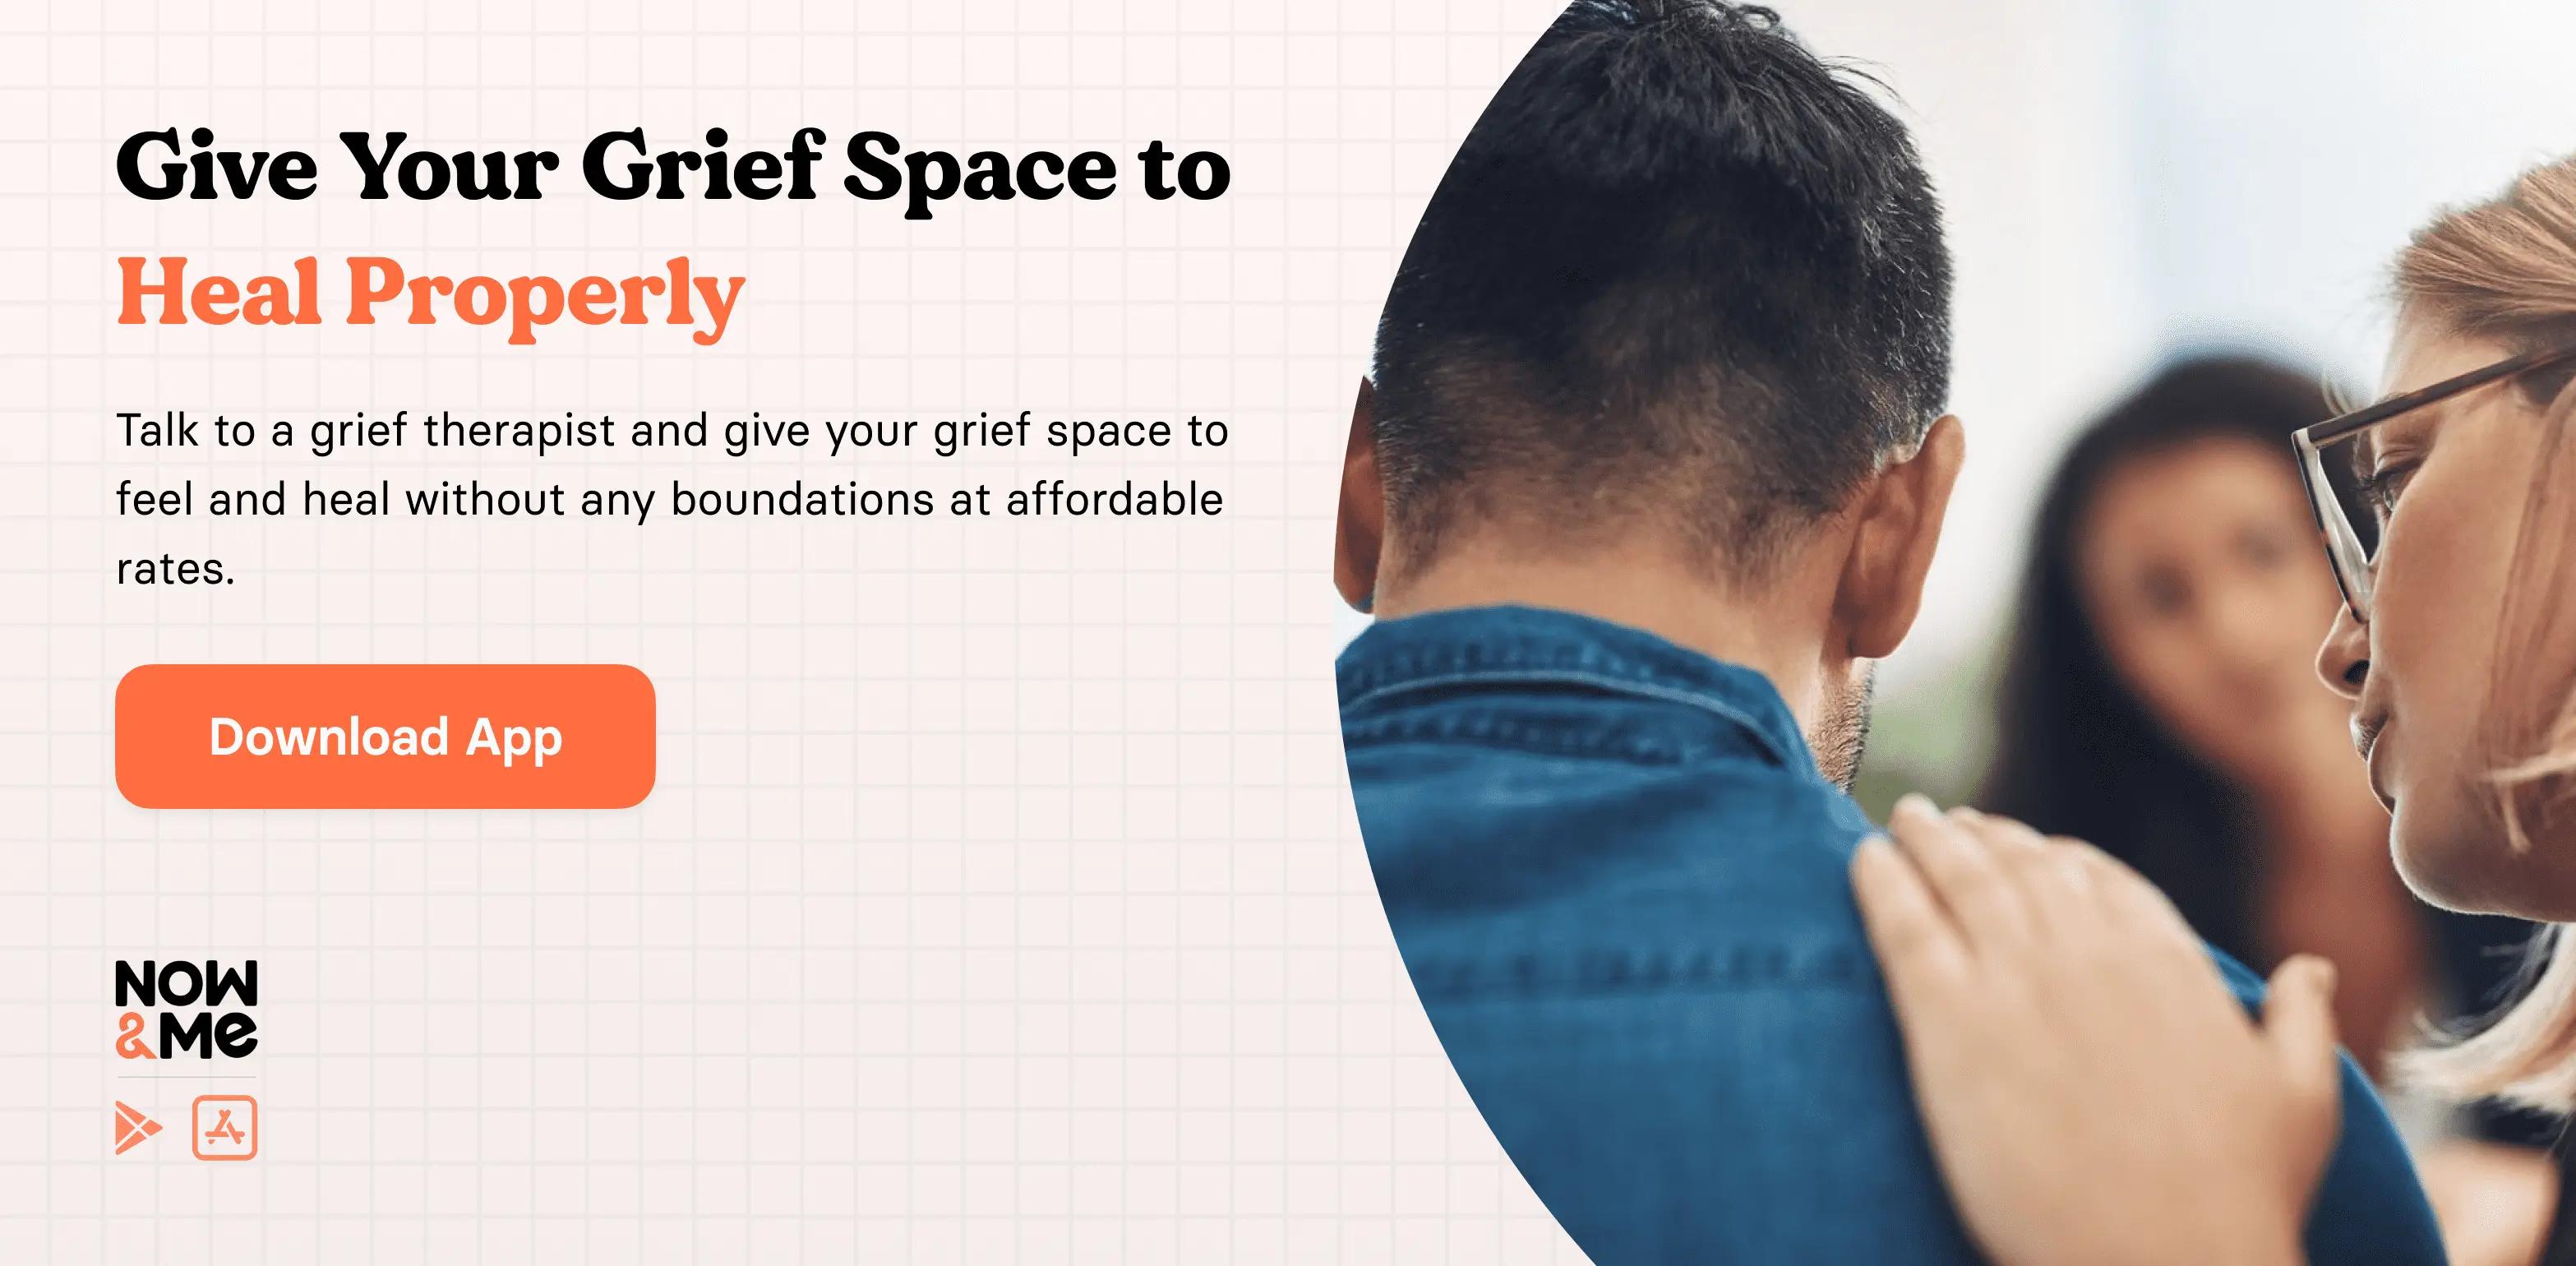 Give Your Grief Space to Heal Properly